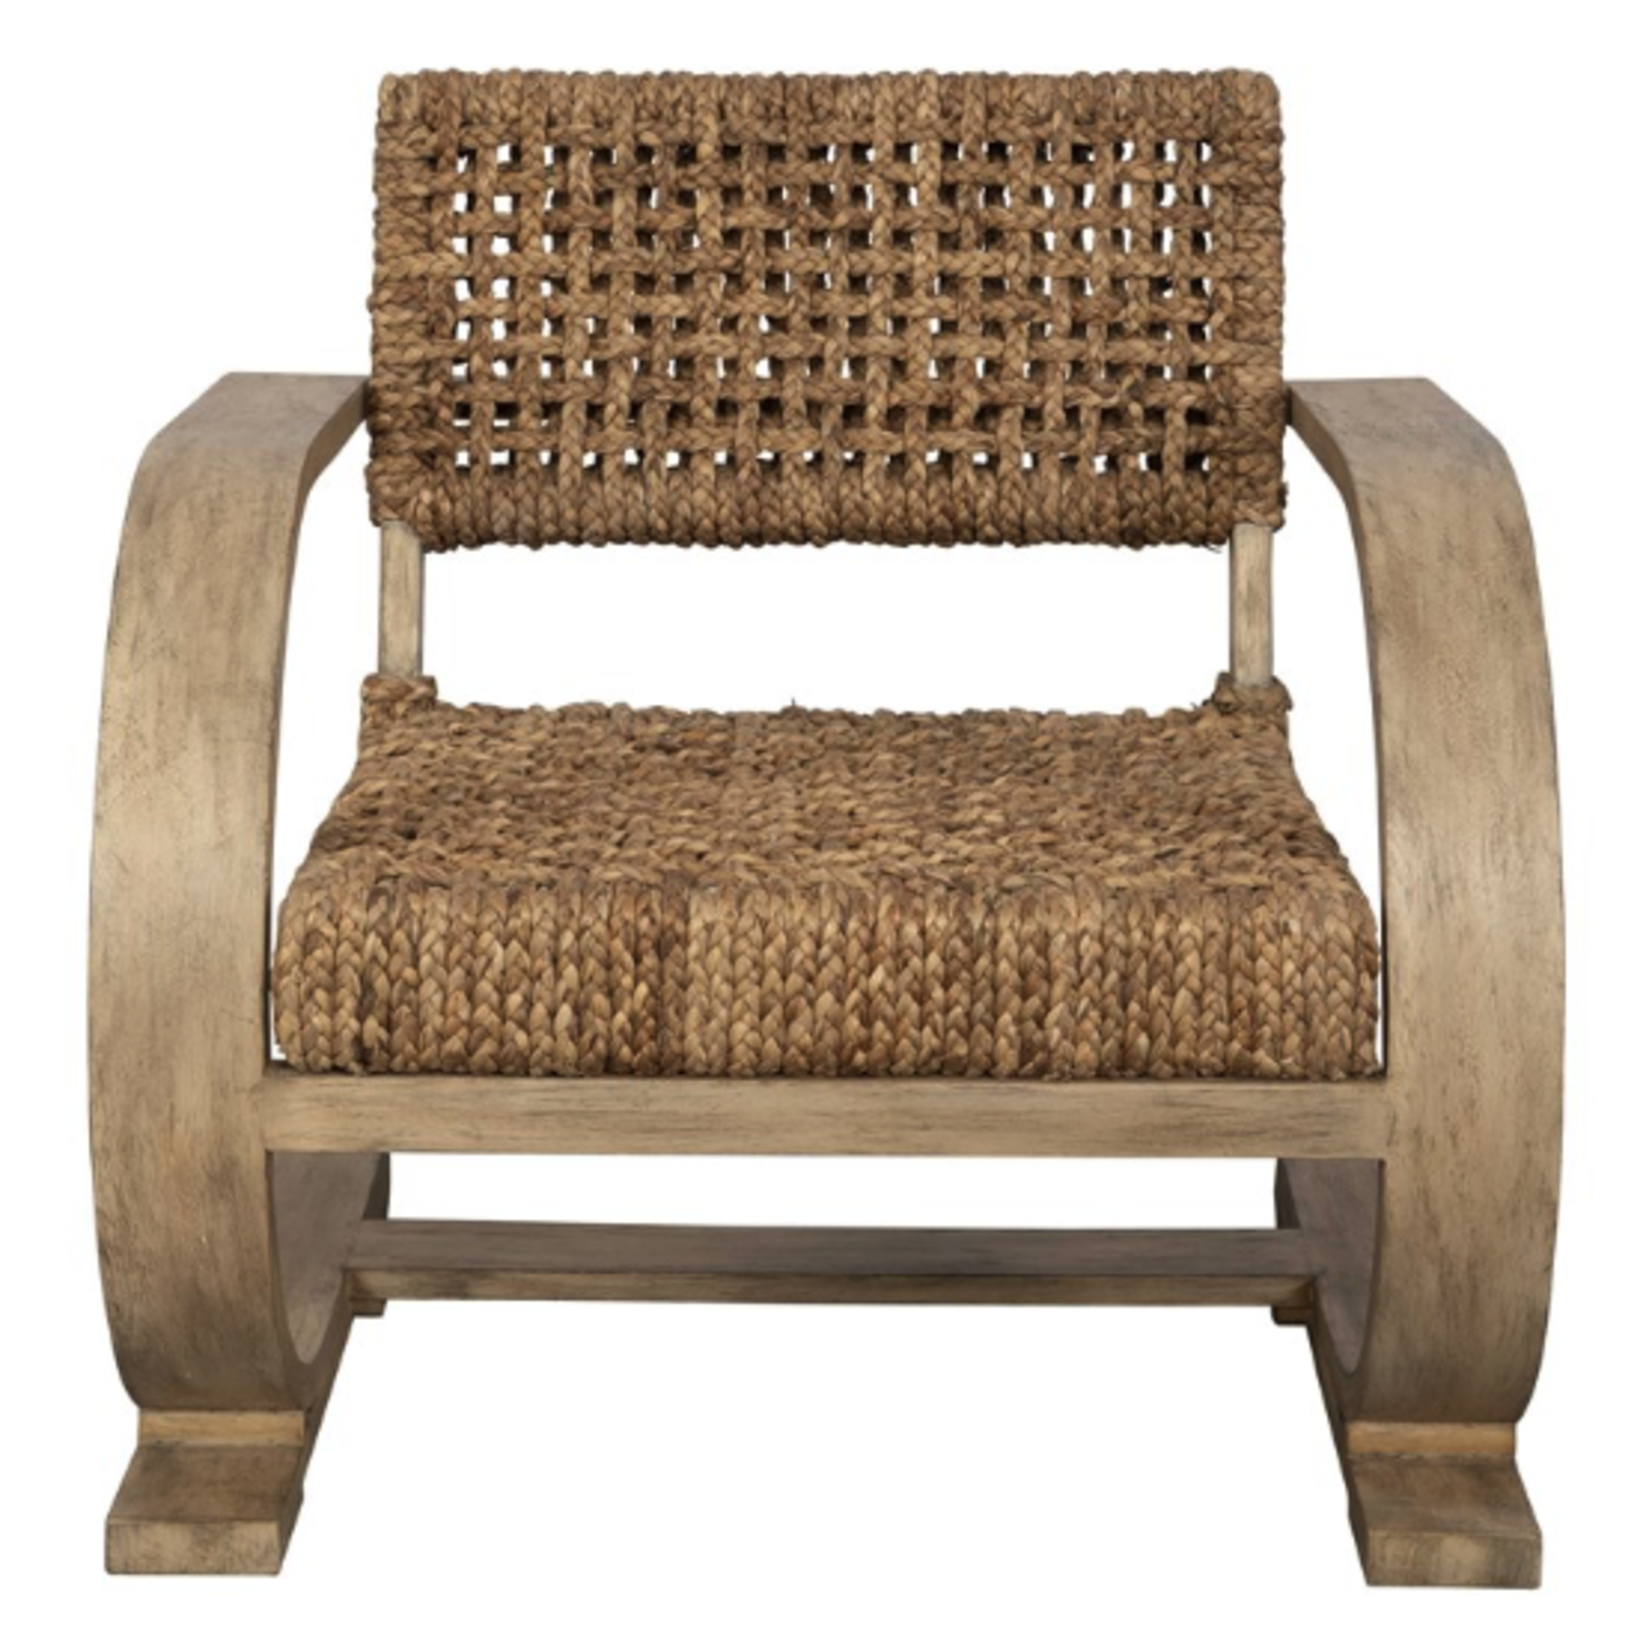 Outside The Box Rehema Driftwood & Water Hyacinth Accent Chair